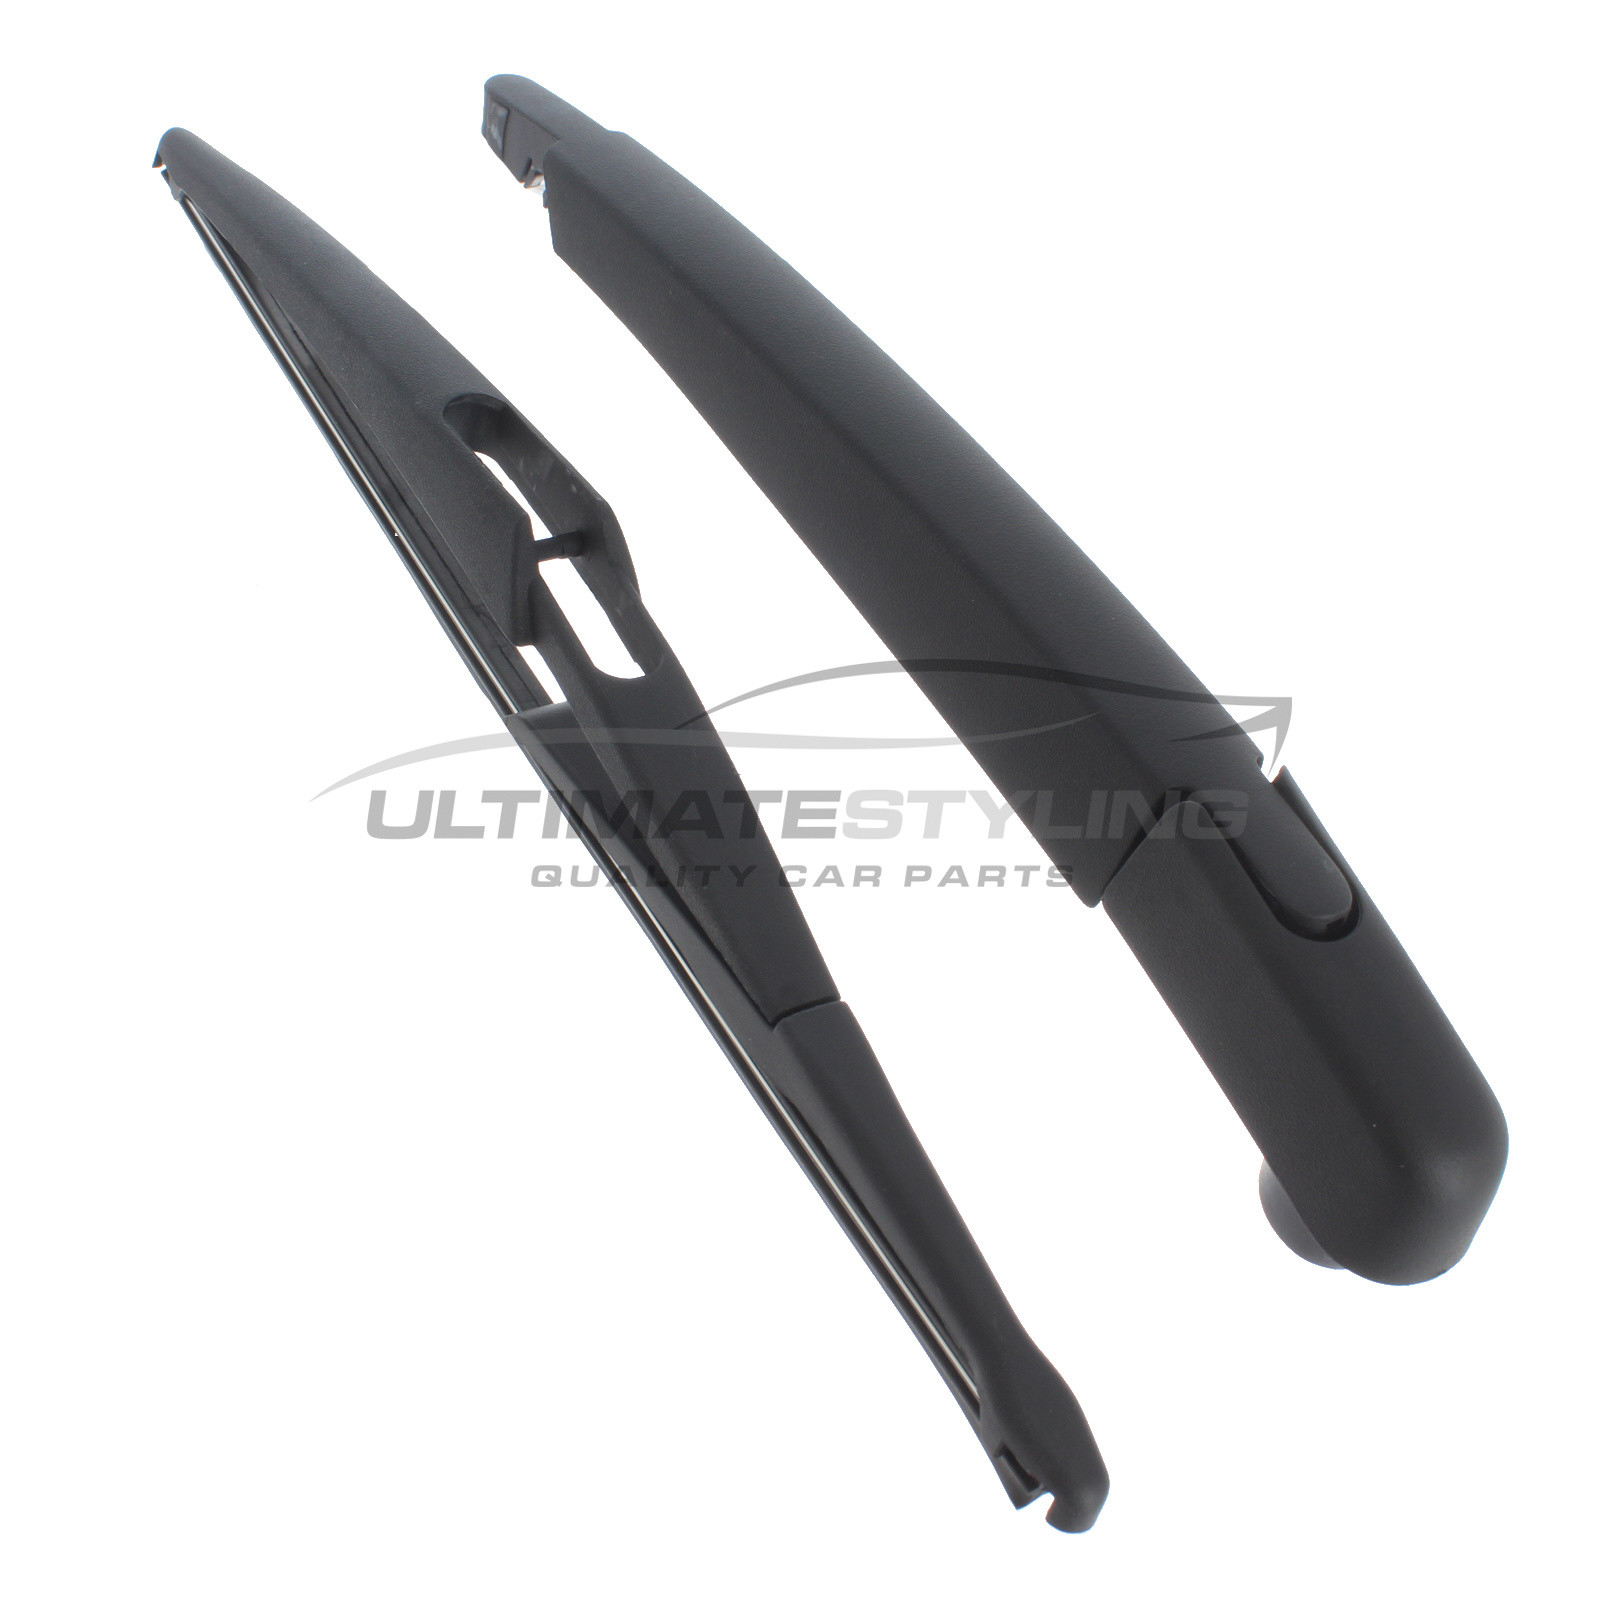 Rear Wiper Arm & Blade Set for Vauxhall Insignia